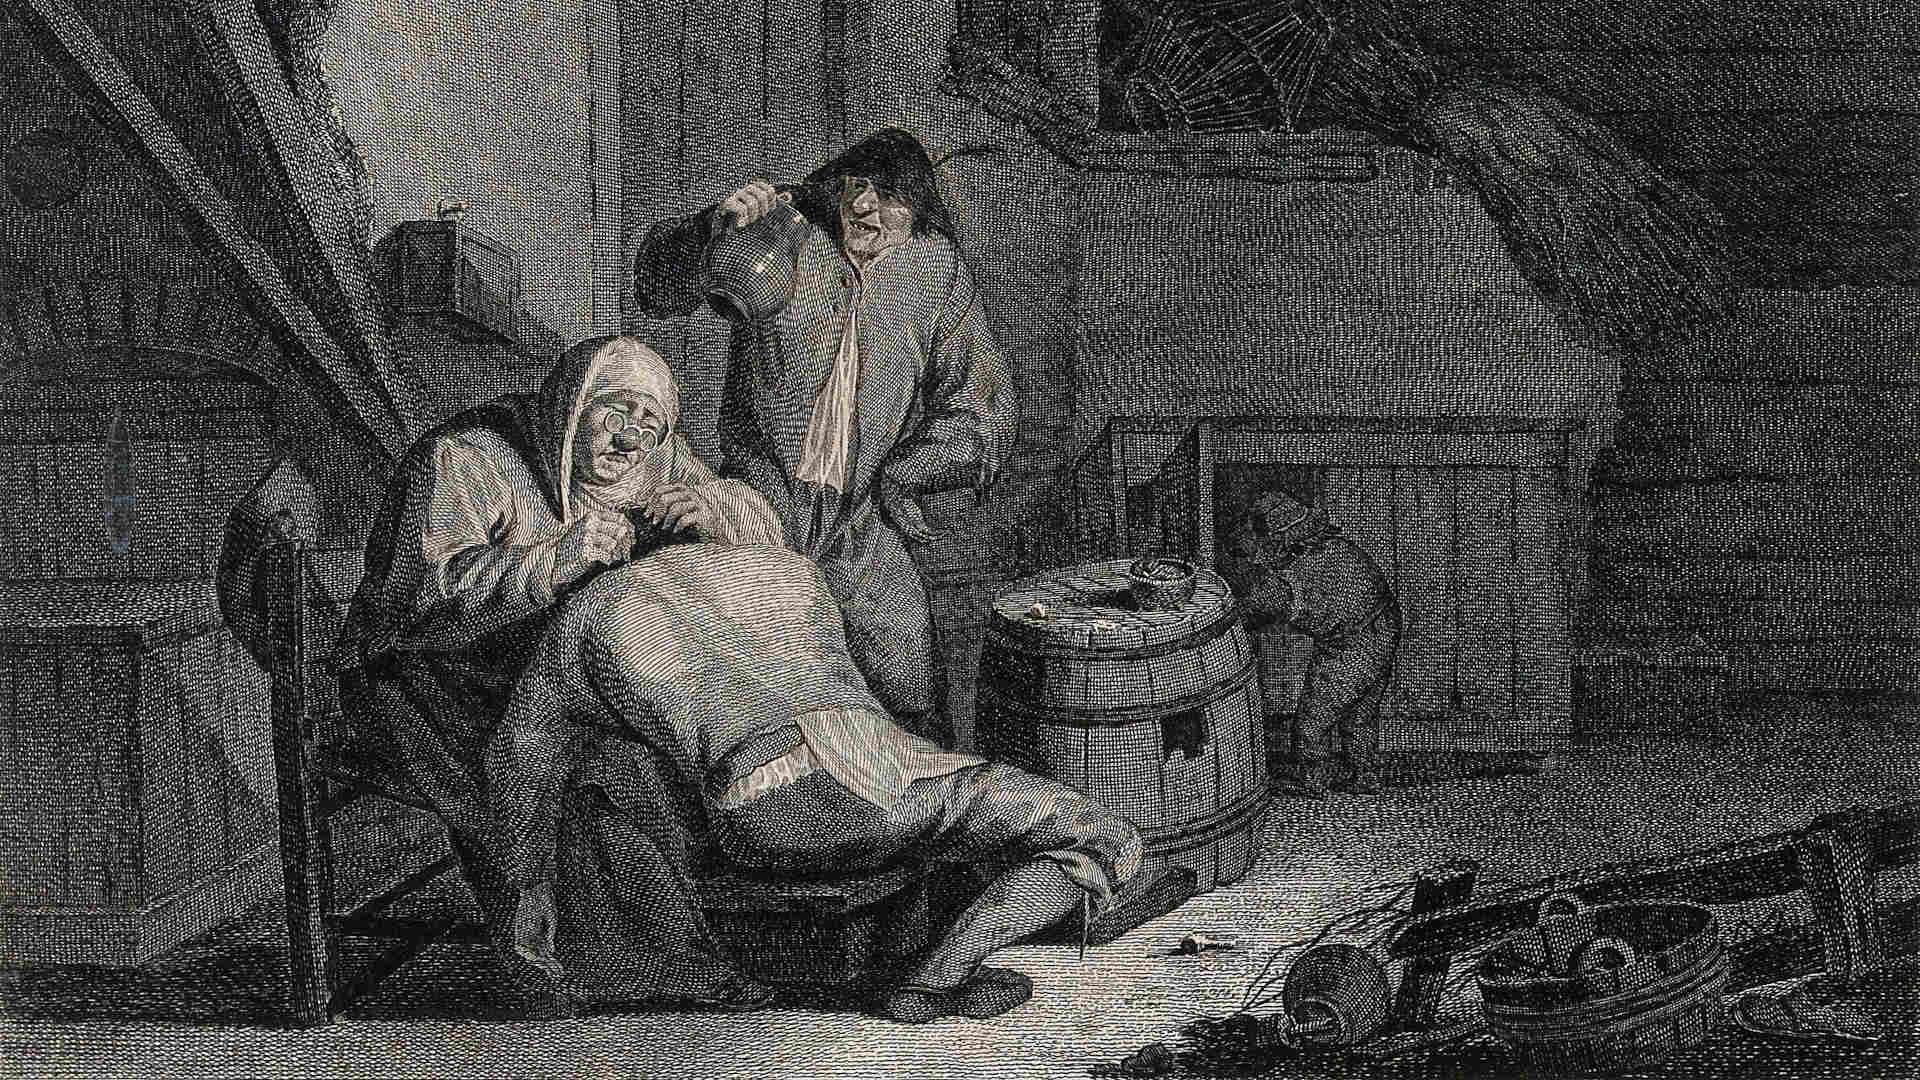 An old woman wearing spectacles picking fleas or lice from a man's hair. Engraving by L.At. (?) after A. van Ostade.